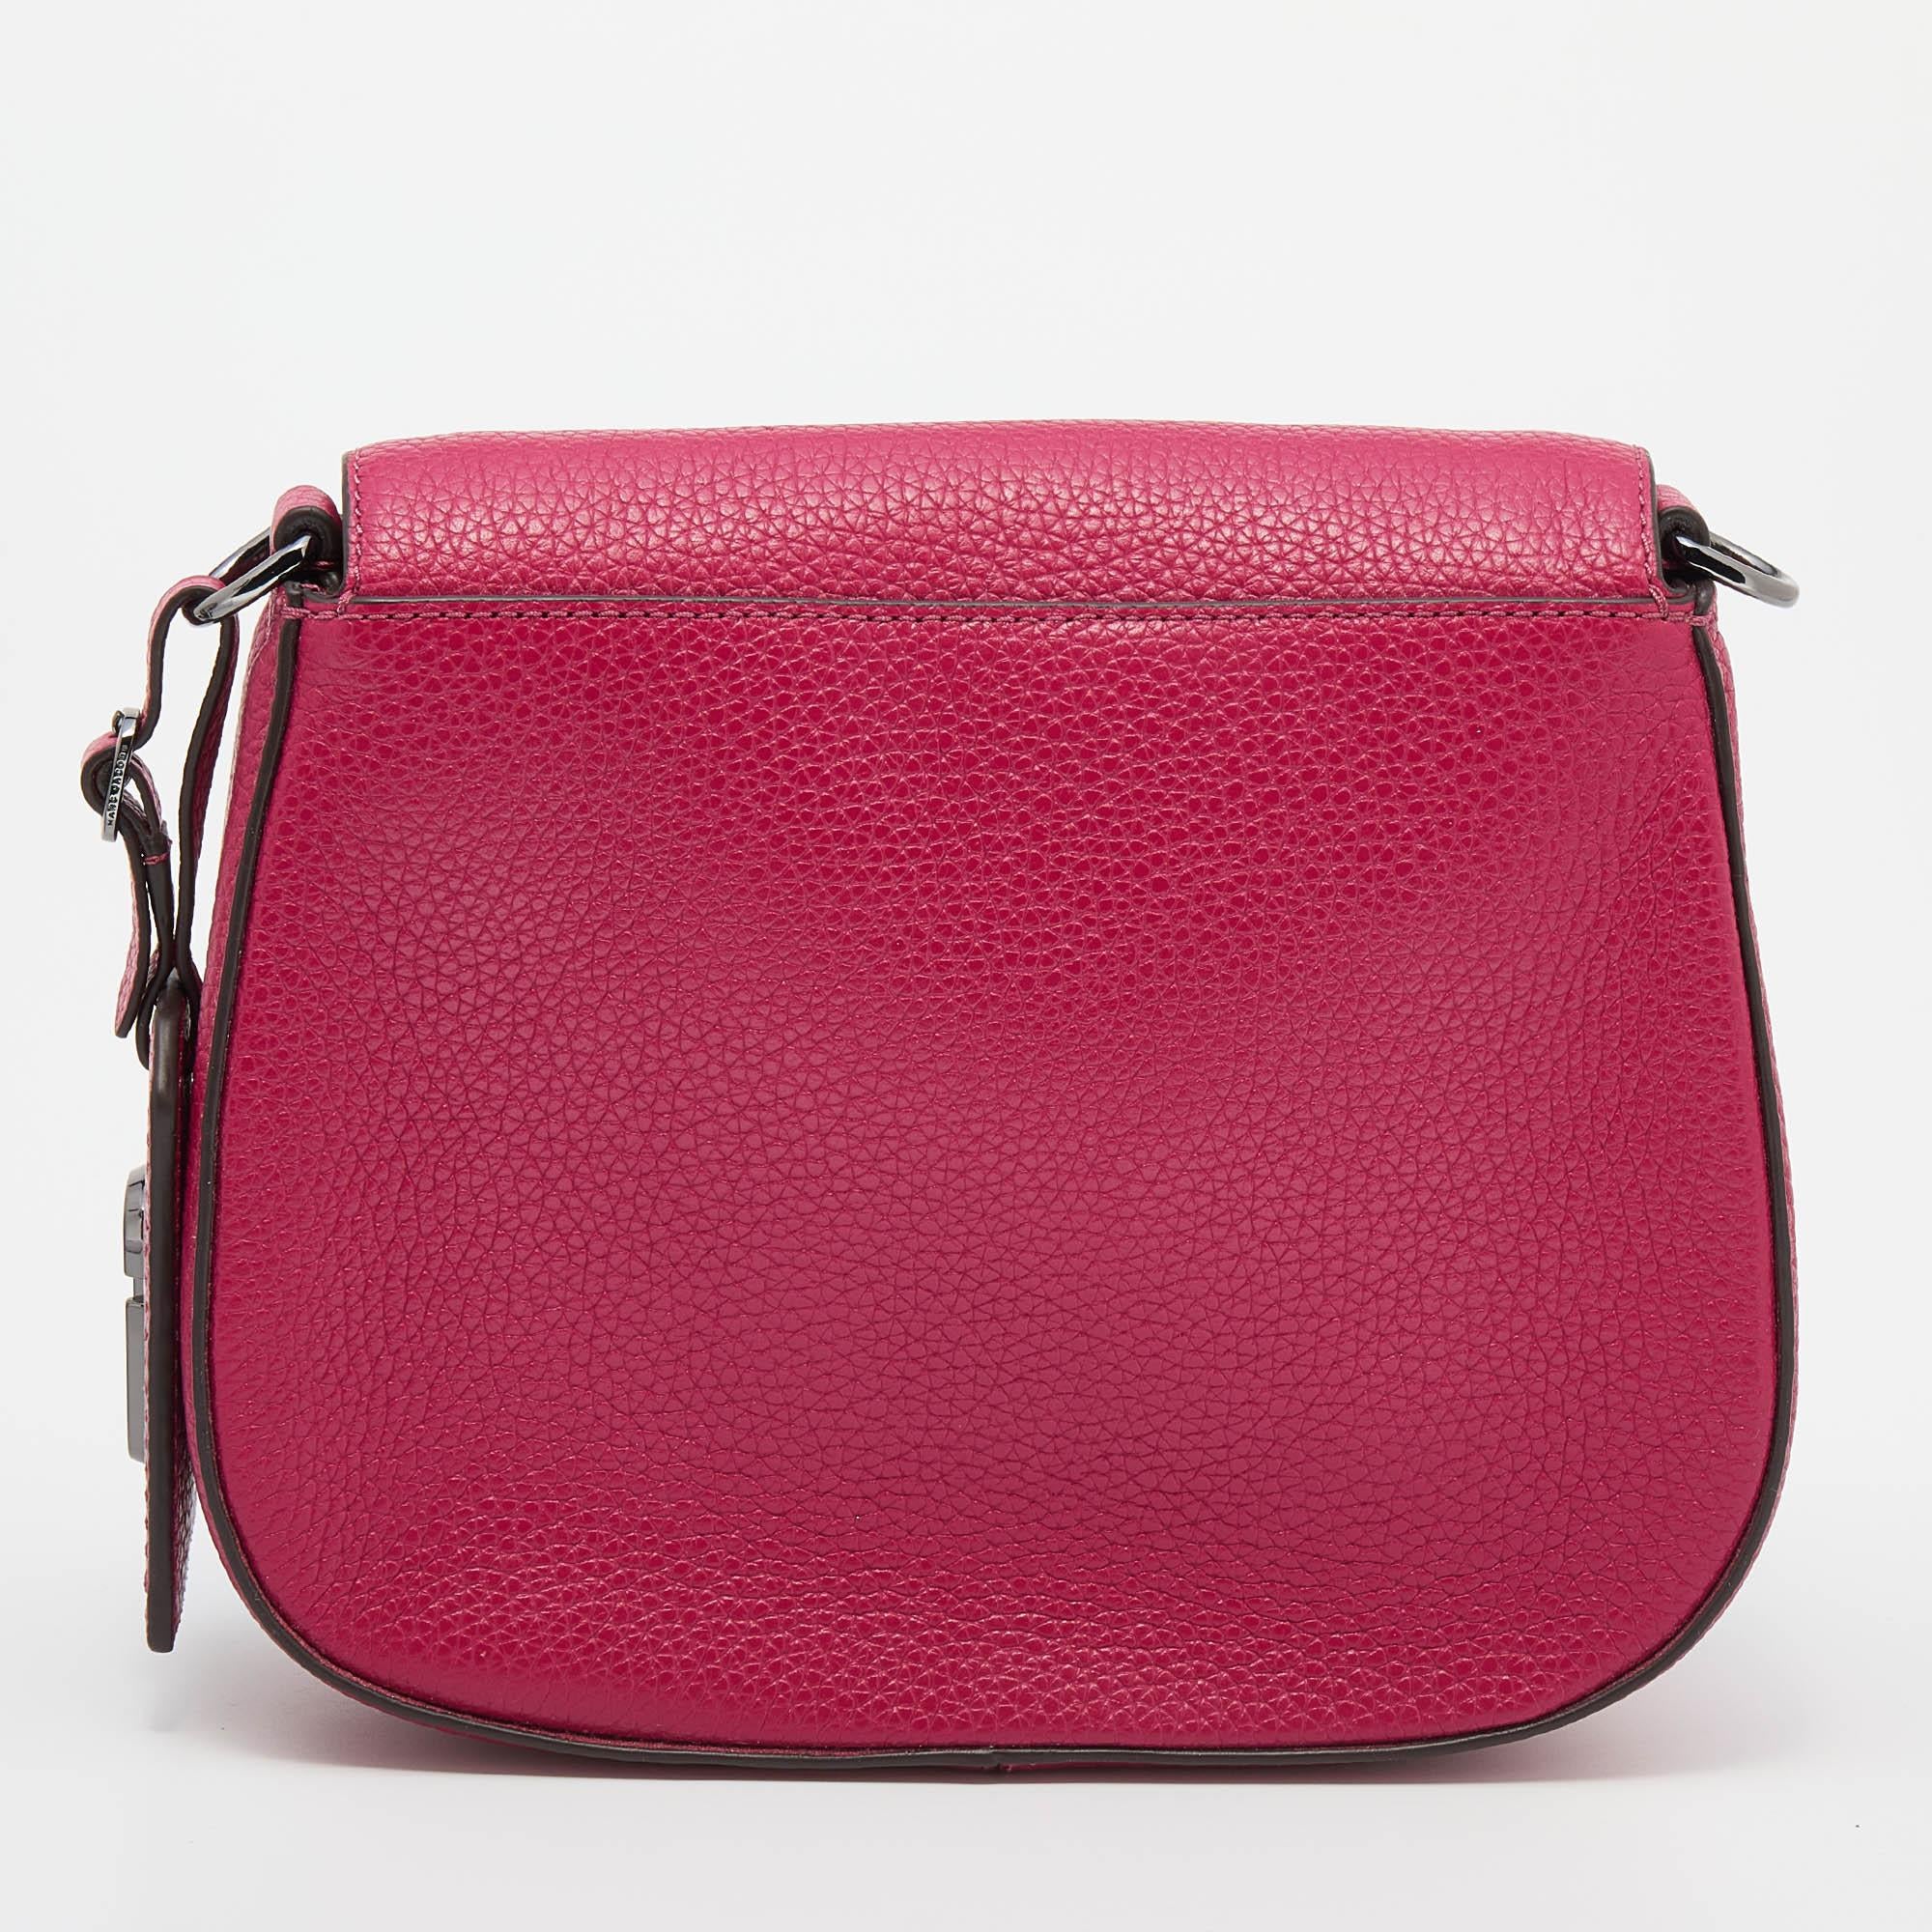 Minimal in style, this Marc Jacobs bag is worthy of a place in your wardrobe. While the exterior is made from raspberry leather, the interior is lined with fabric. The front zipper pocket, shoulder strap, and brand detailing on the front complete